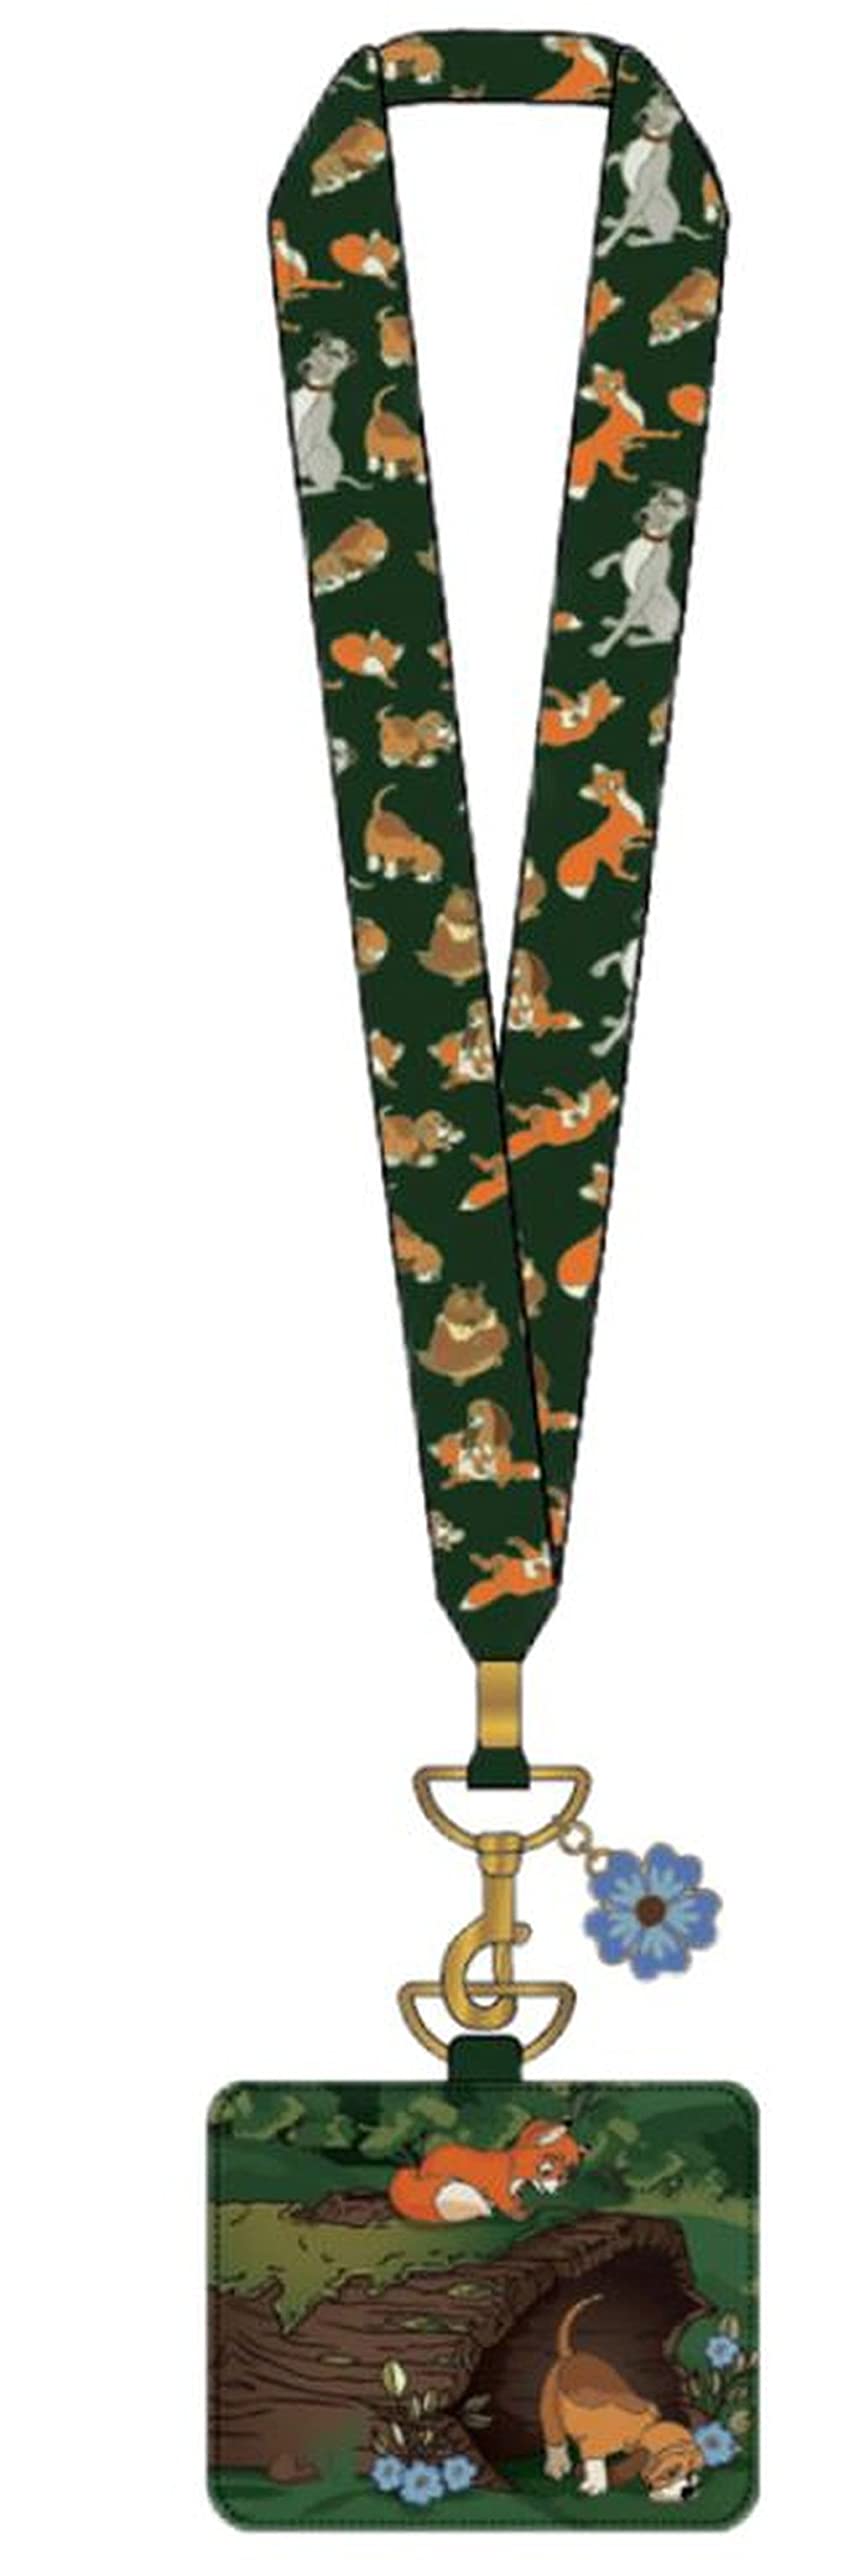 LOUNGEFLY Disney The Fox and The Hound Log Lanyard with CARDHOLDER